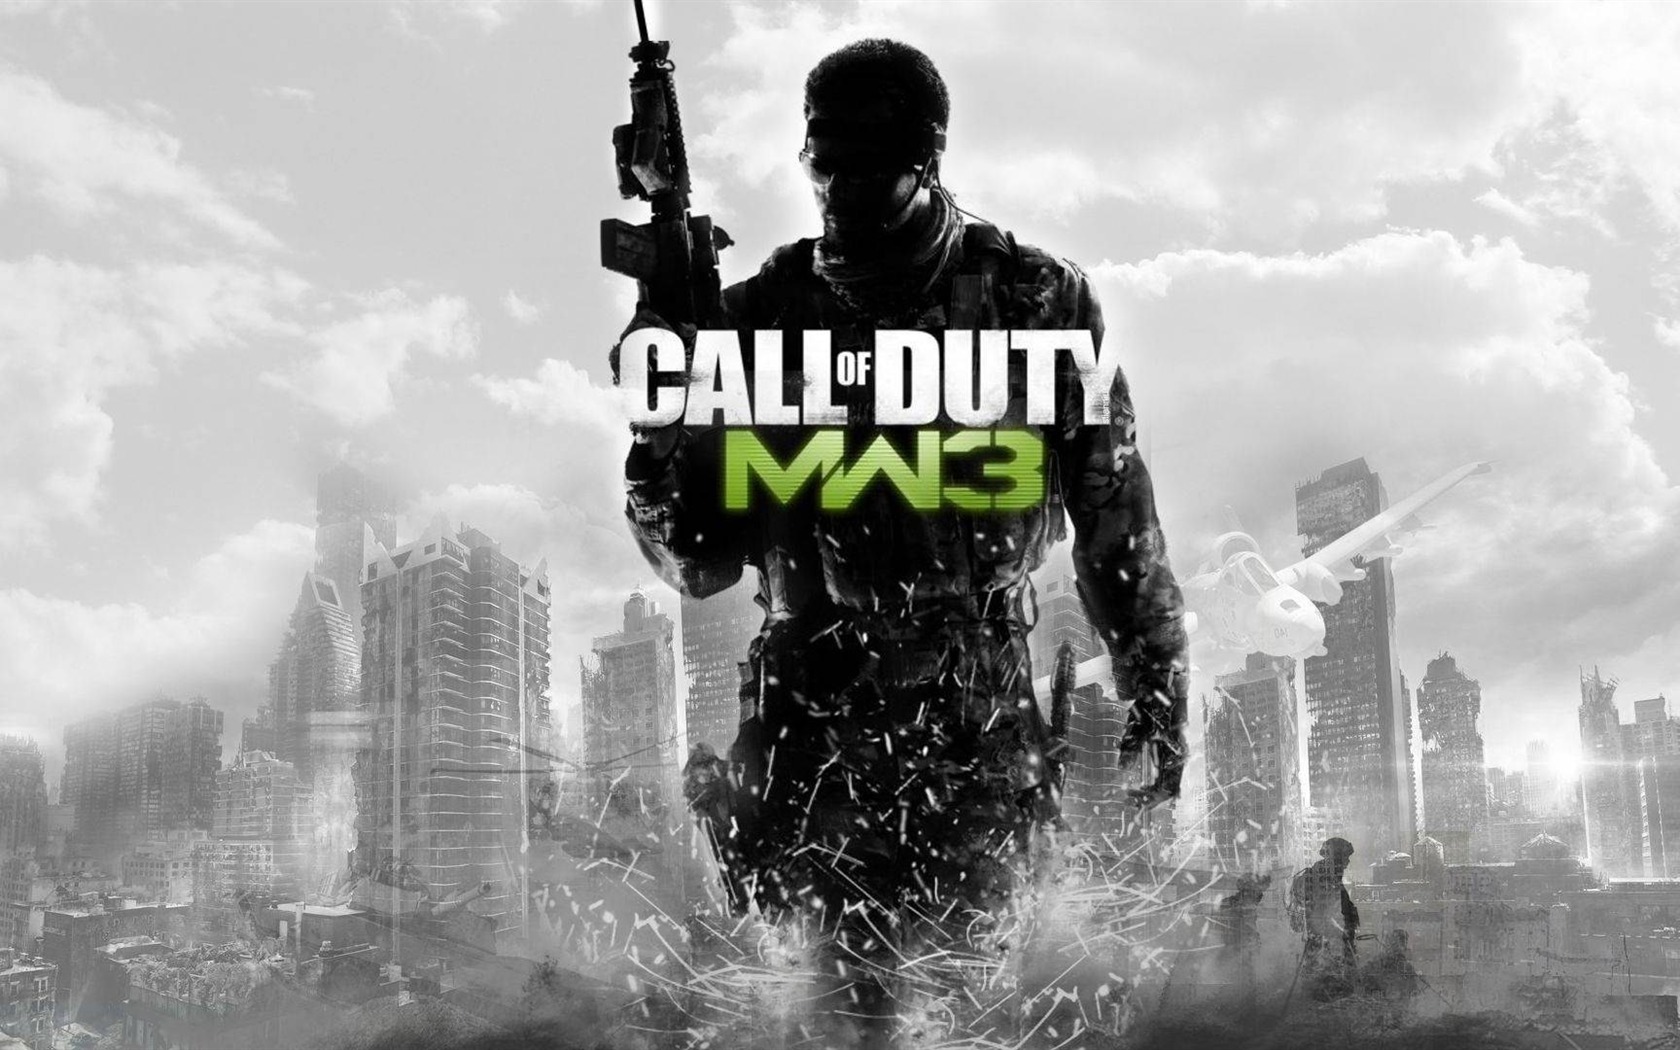 Call of Duty: MW3 wallpapers HD #1 - 1680x1050